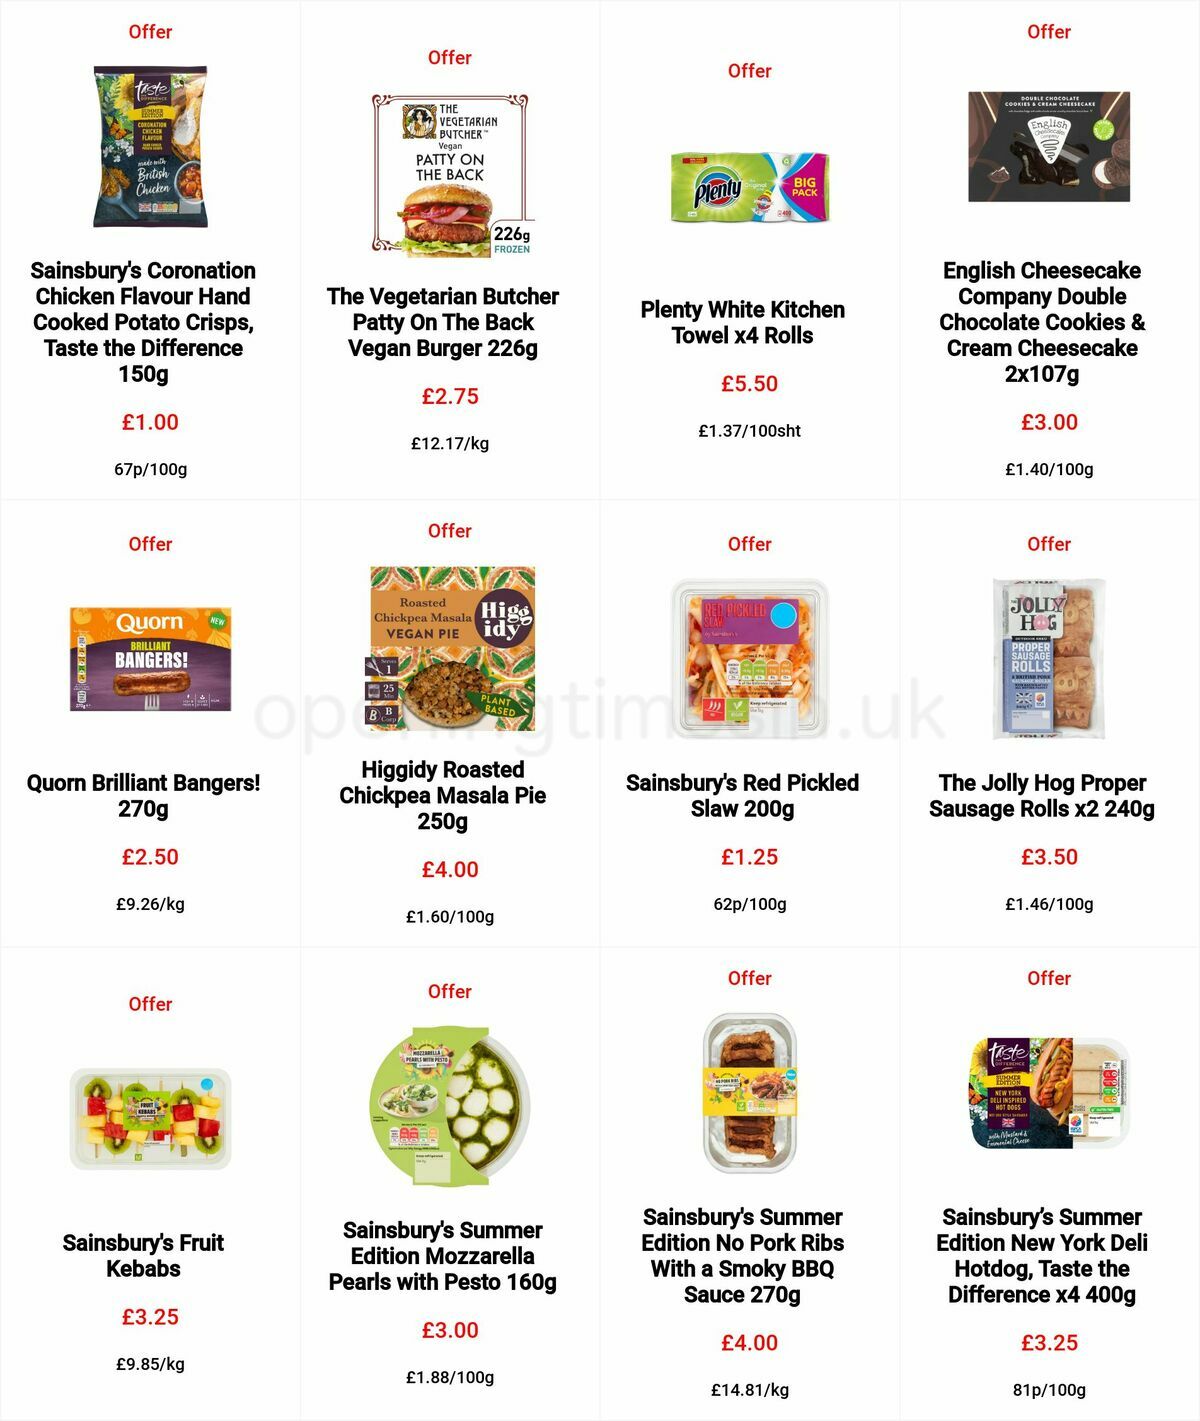 Sainsbury's Jubilee Celebration Offers from 2 June